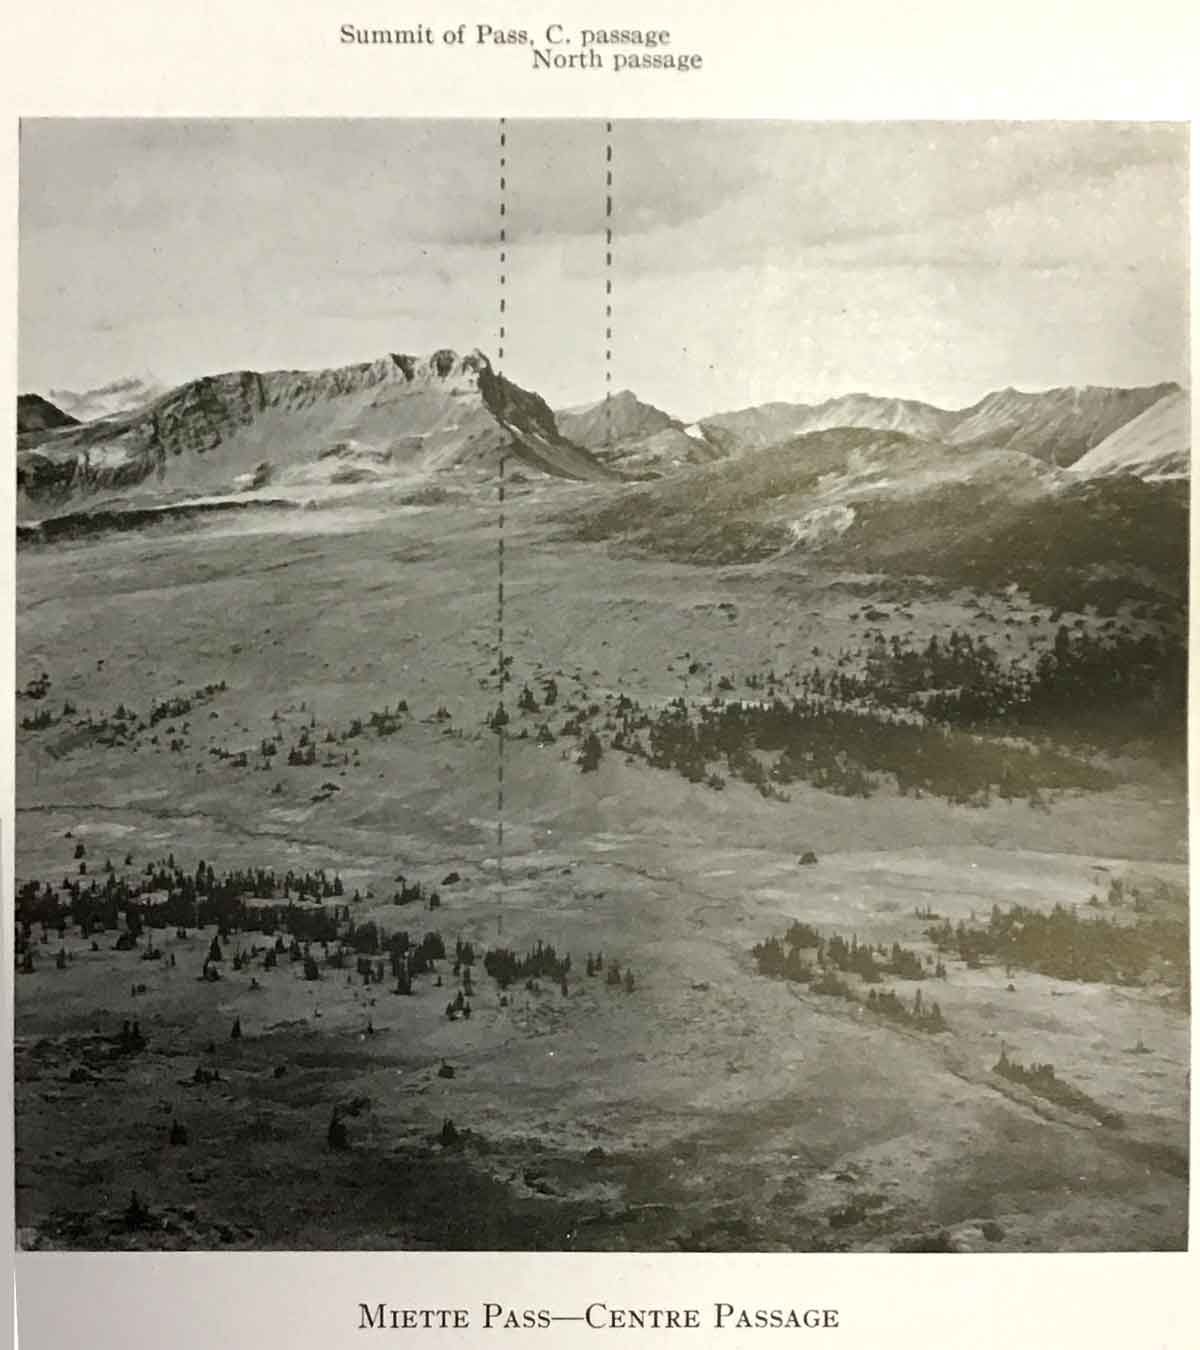 Miette Pass — Centre Passage.
Report of the Commission Appointed to Delimit the Boundary between the Provinces of Alberta and British Columbia, III. 1925